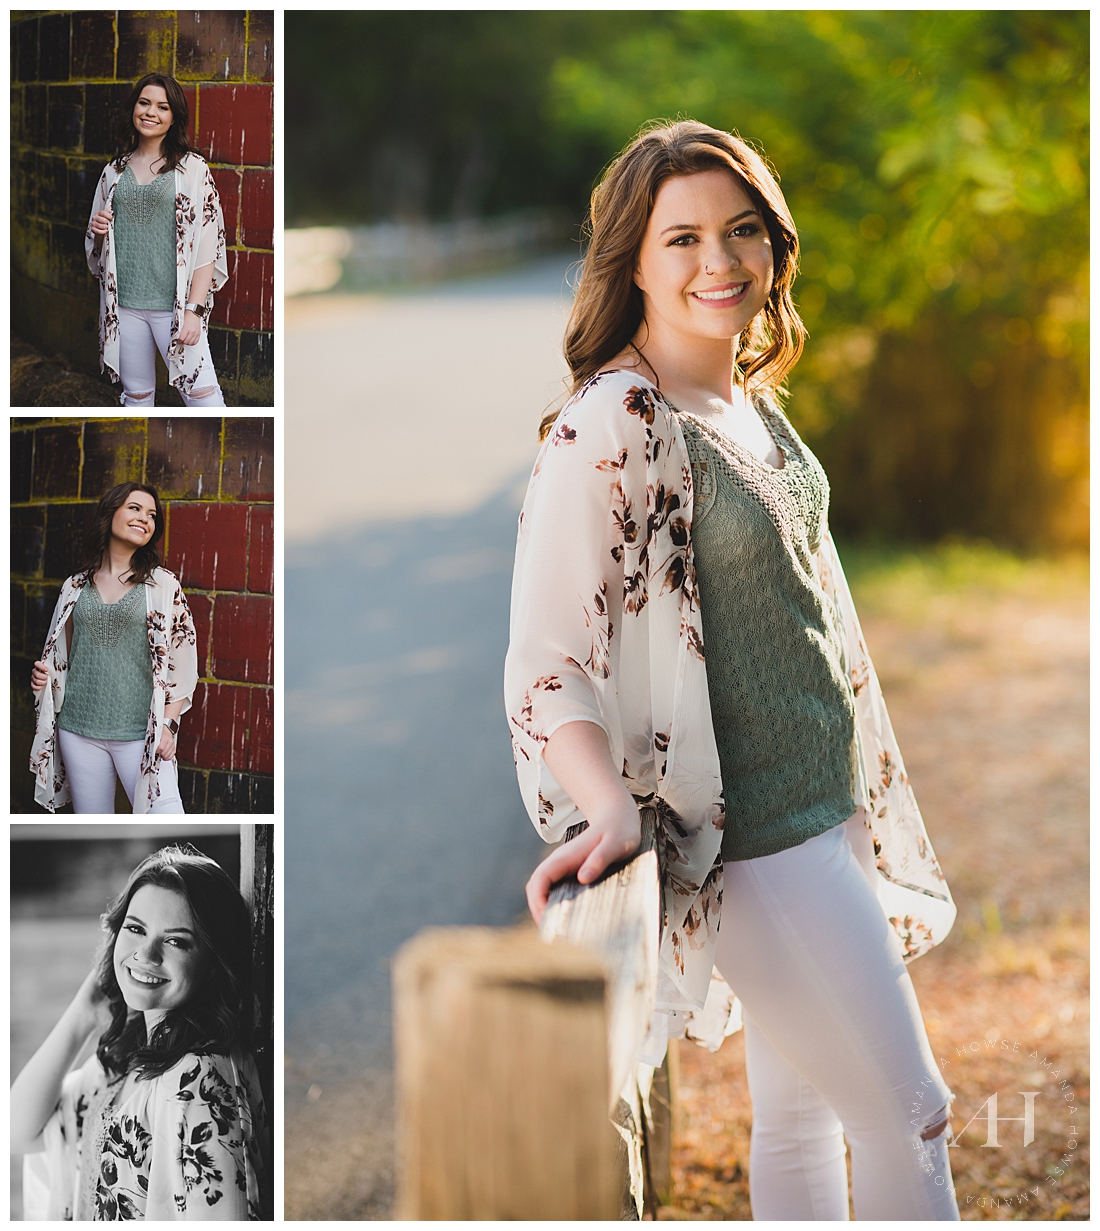 How to Wear a Floral Kimono for Senior Portraits | Casual Outfit Ideas for Senior Portraits, Pose Ideas for Senior Girls, Golden Senior Portraits | Amanda Howse Photography | The Best Tacoma Senior Portrait Photographer